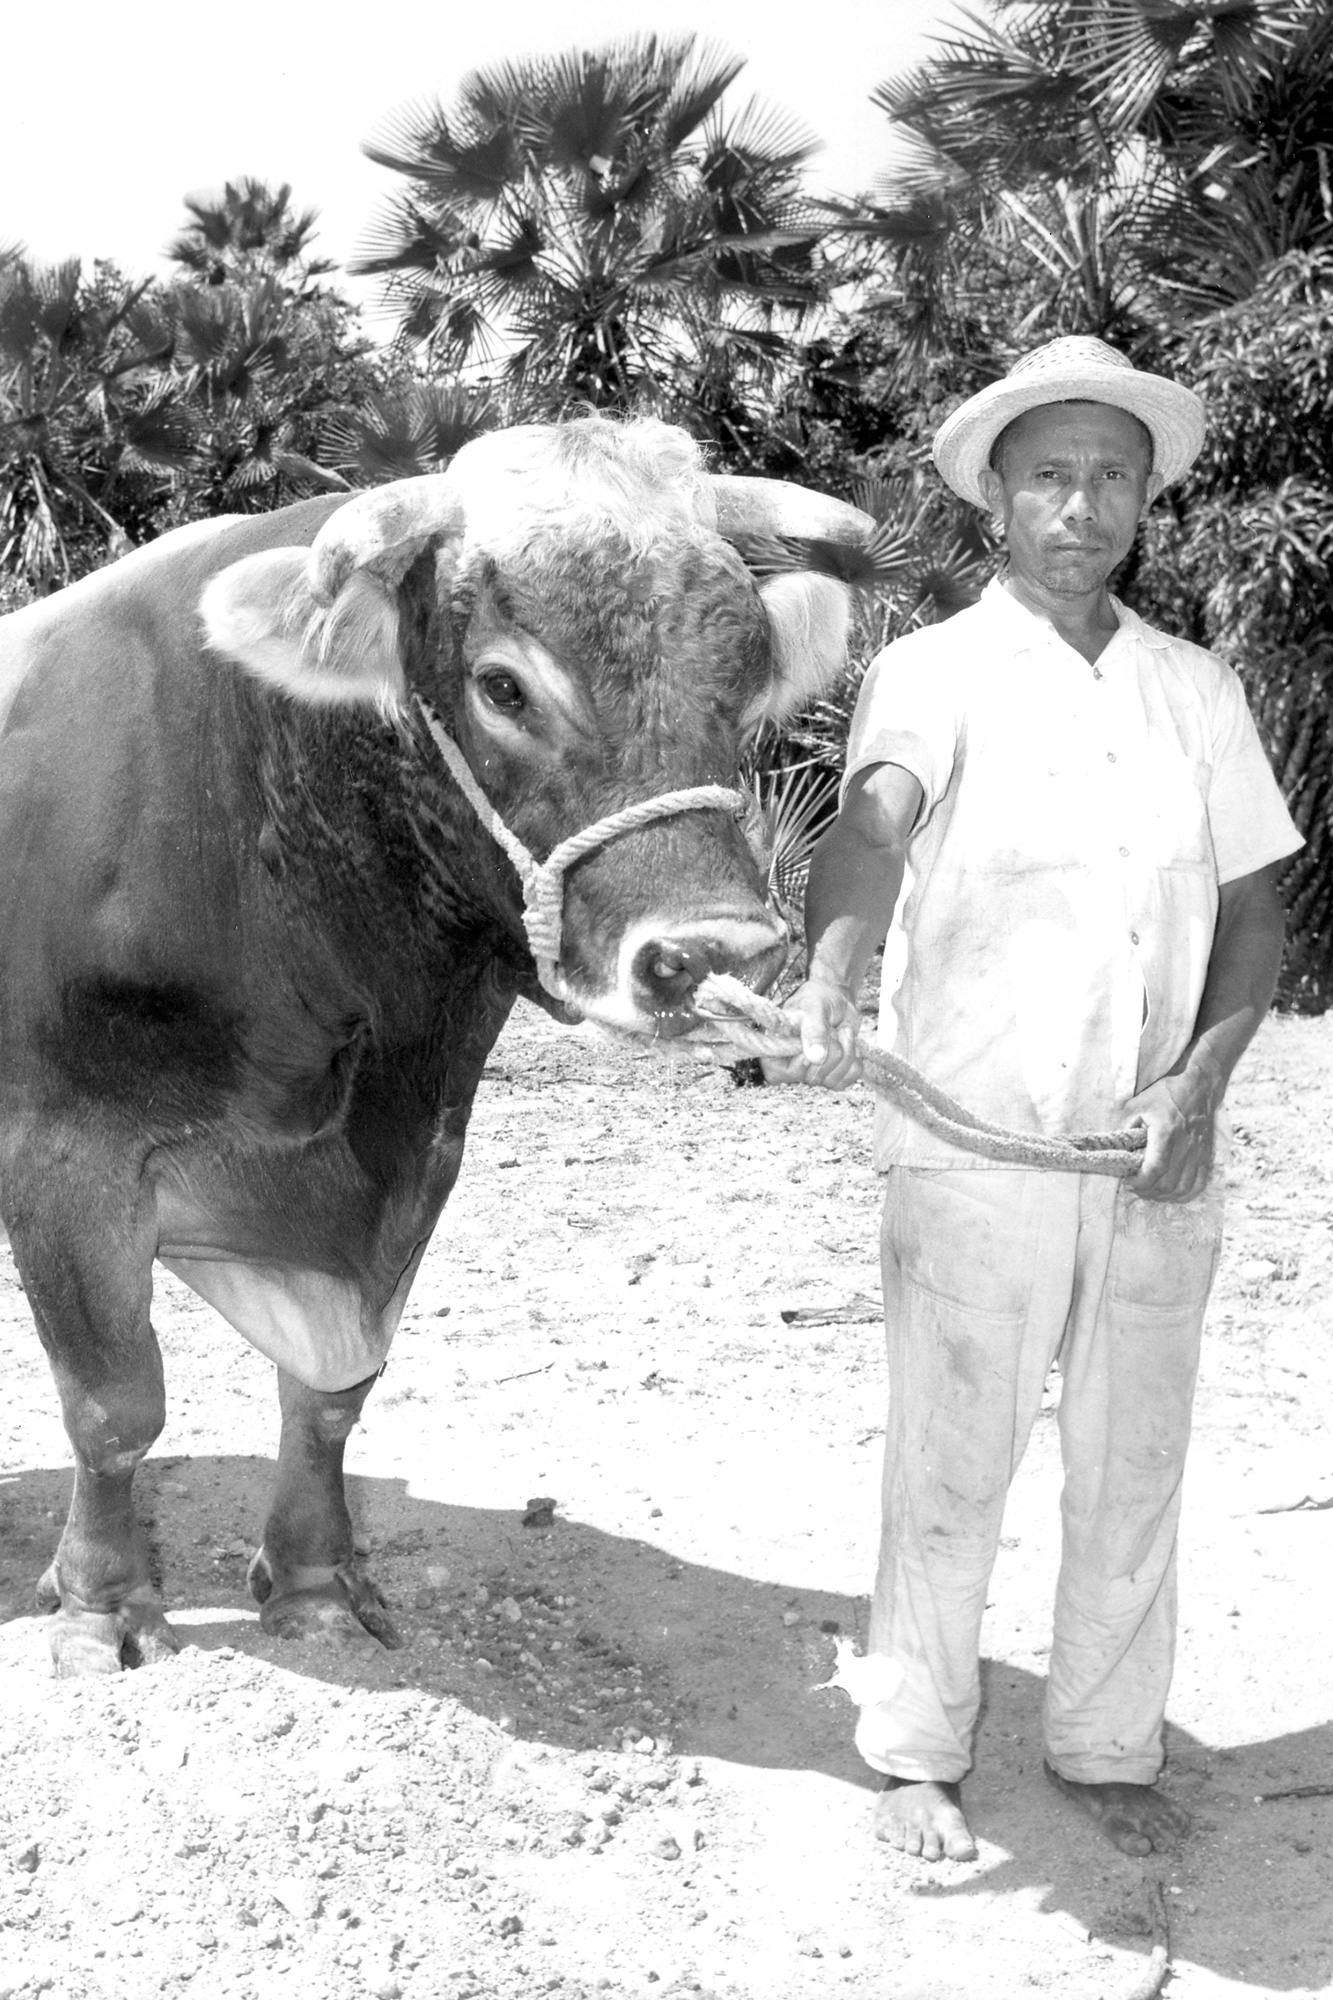 Brown Swiss Dairy Cows donated to Fortaleza, Brazil by Herbert Johnson, Jr.